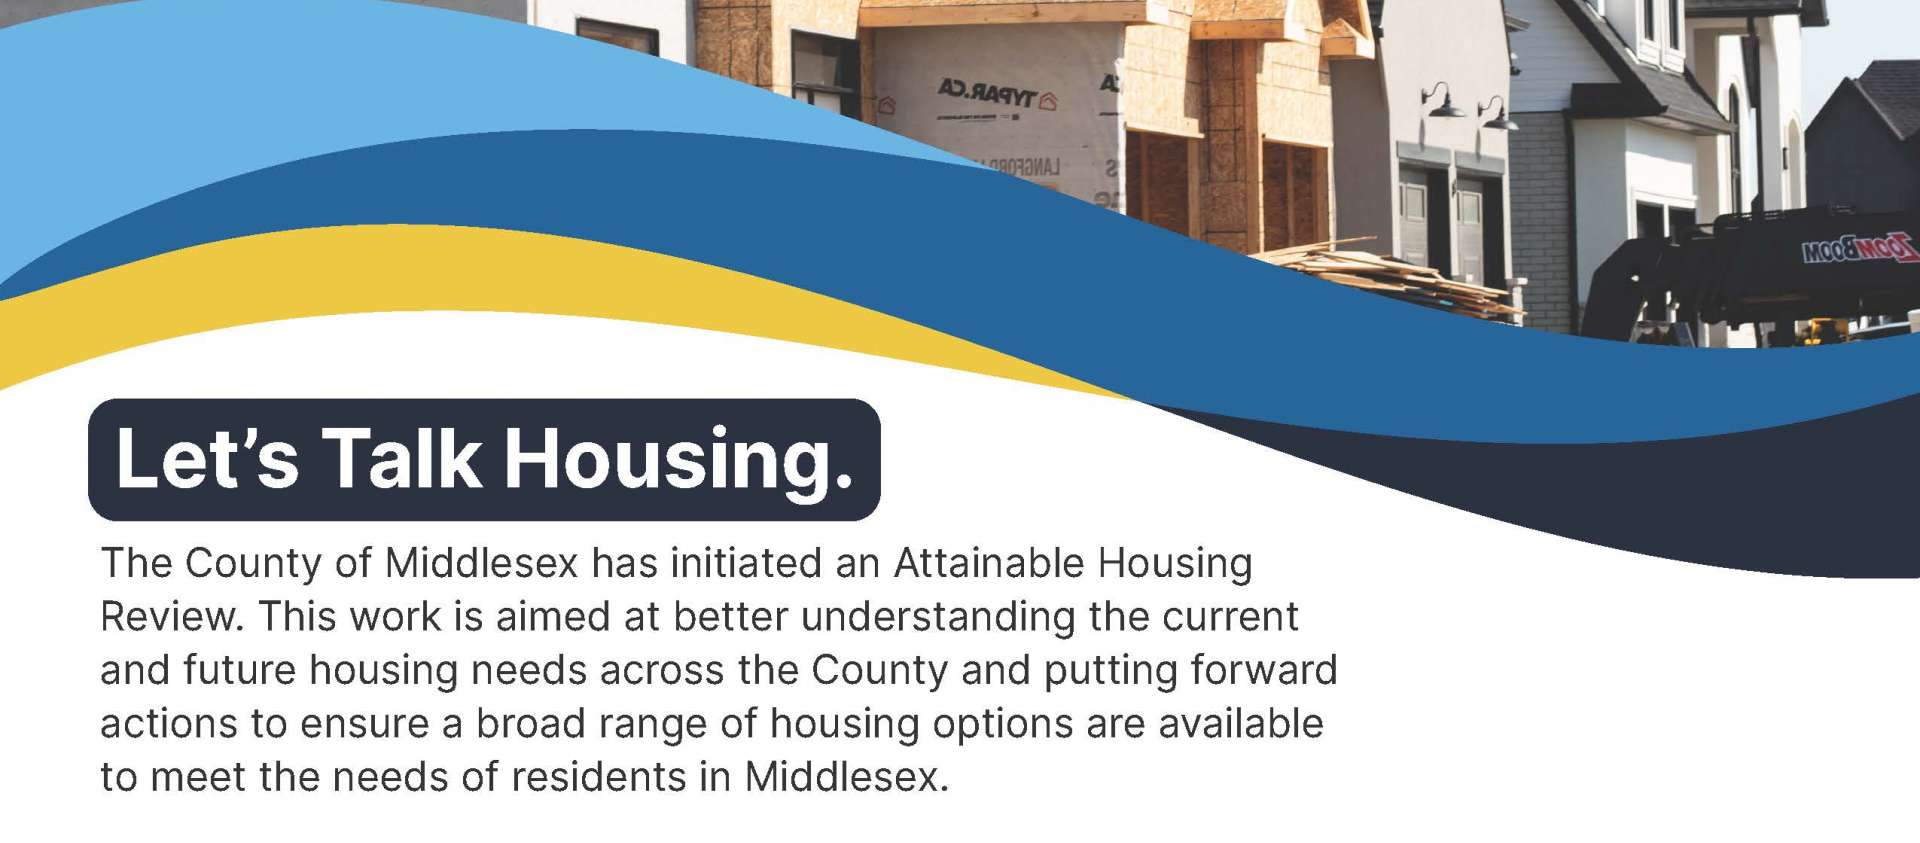 Attainable Housing Review